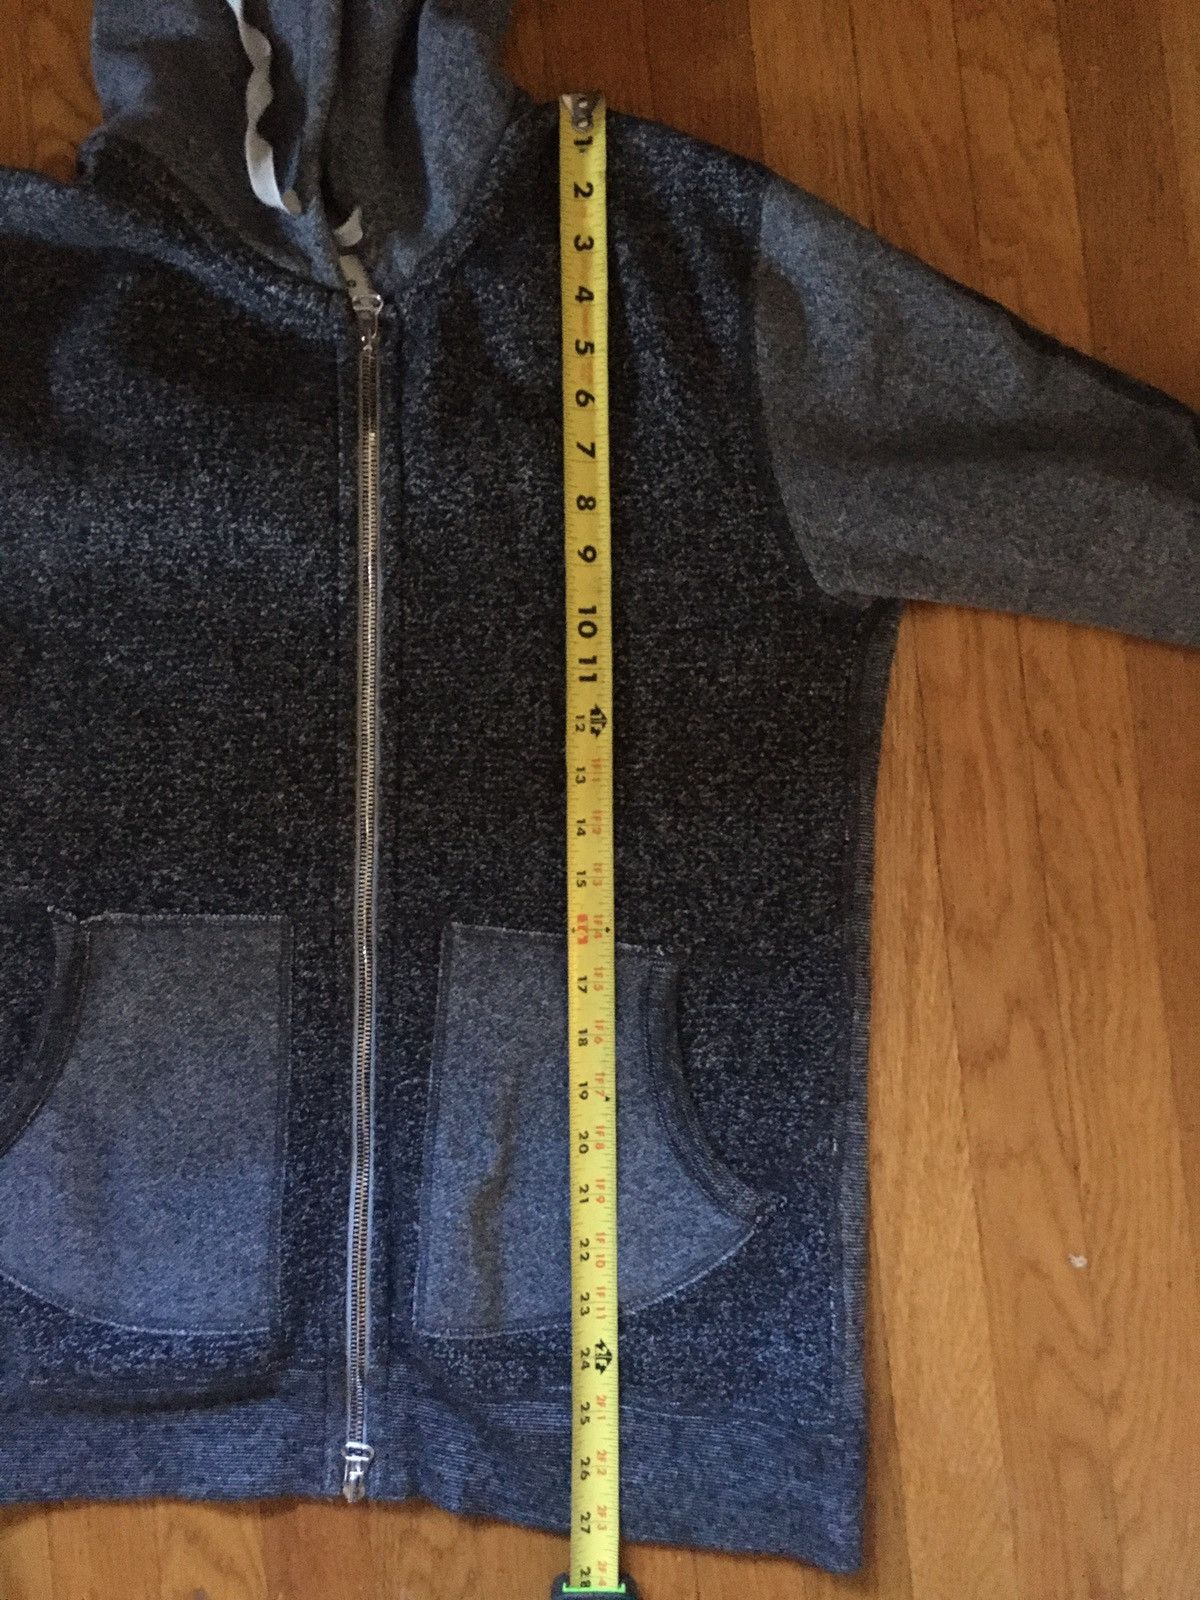 Wings + Horns Reigning champ x Wings Horns tiger fleece hoodie Size US M / EU 48-50 / 2 - 12 Thumbnail